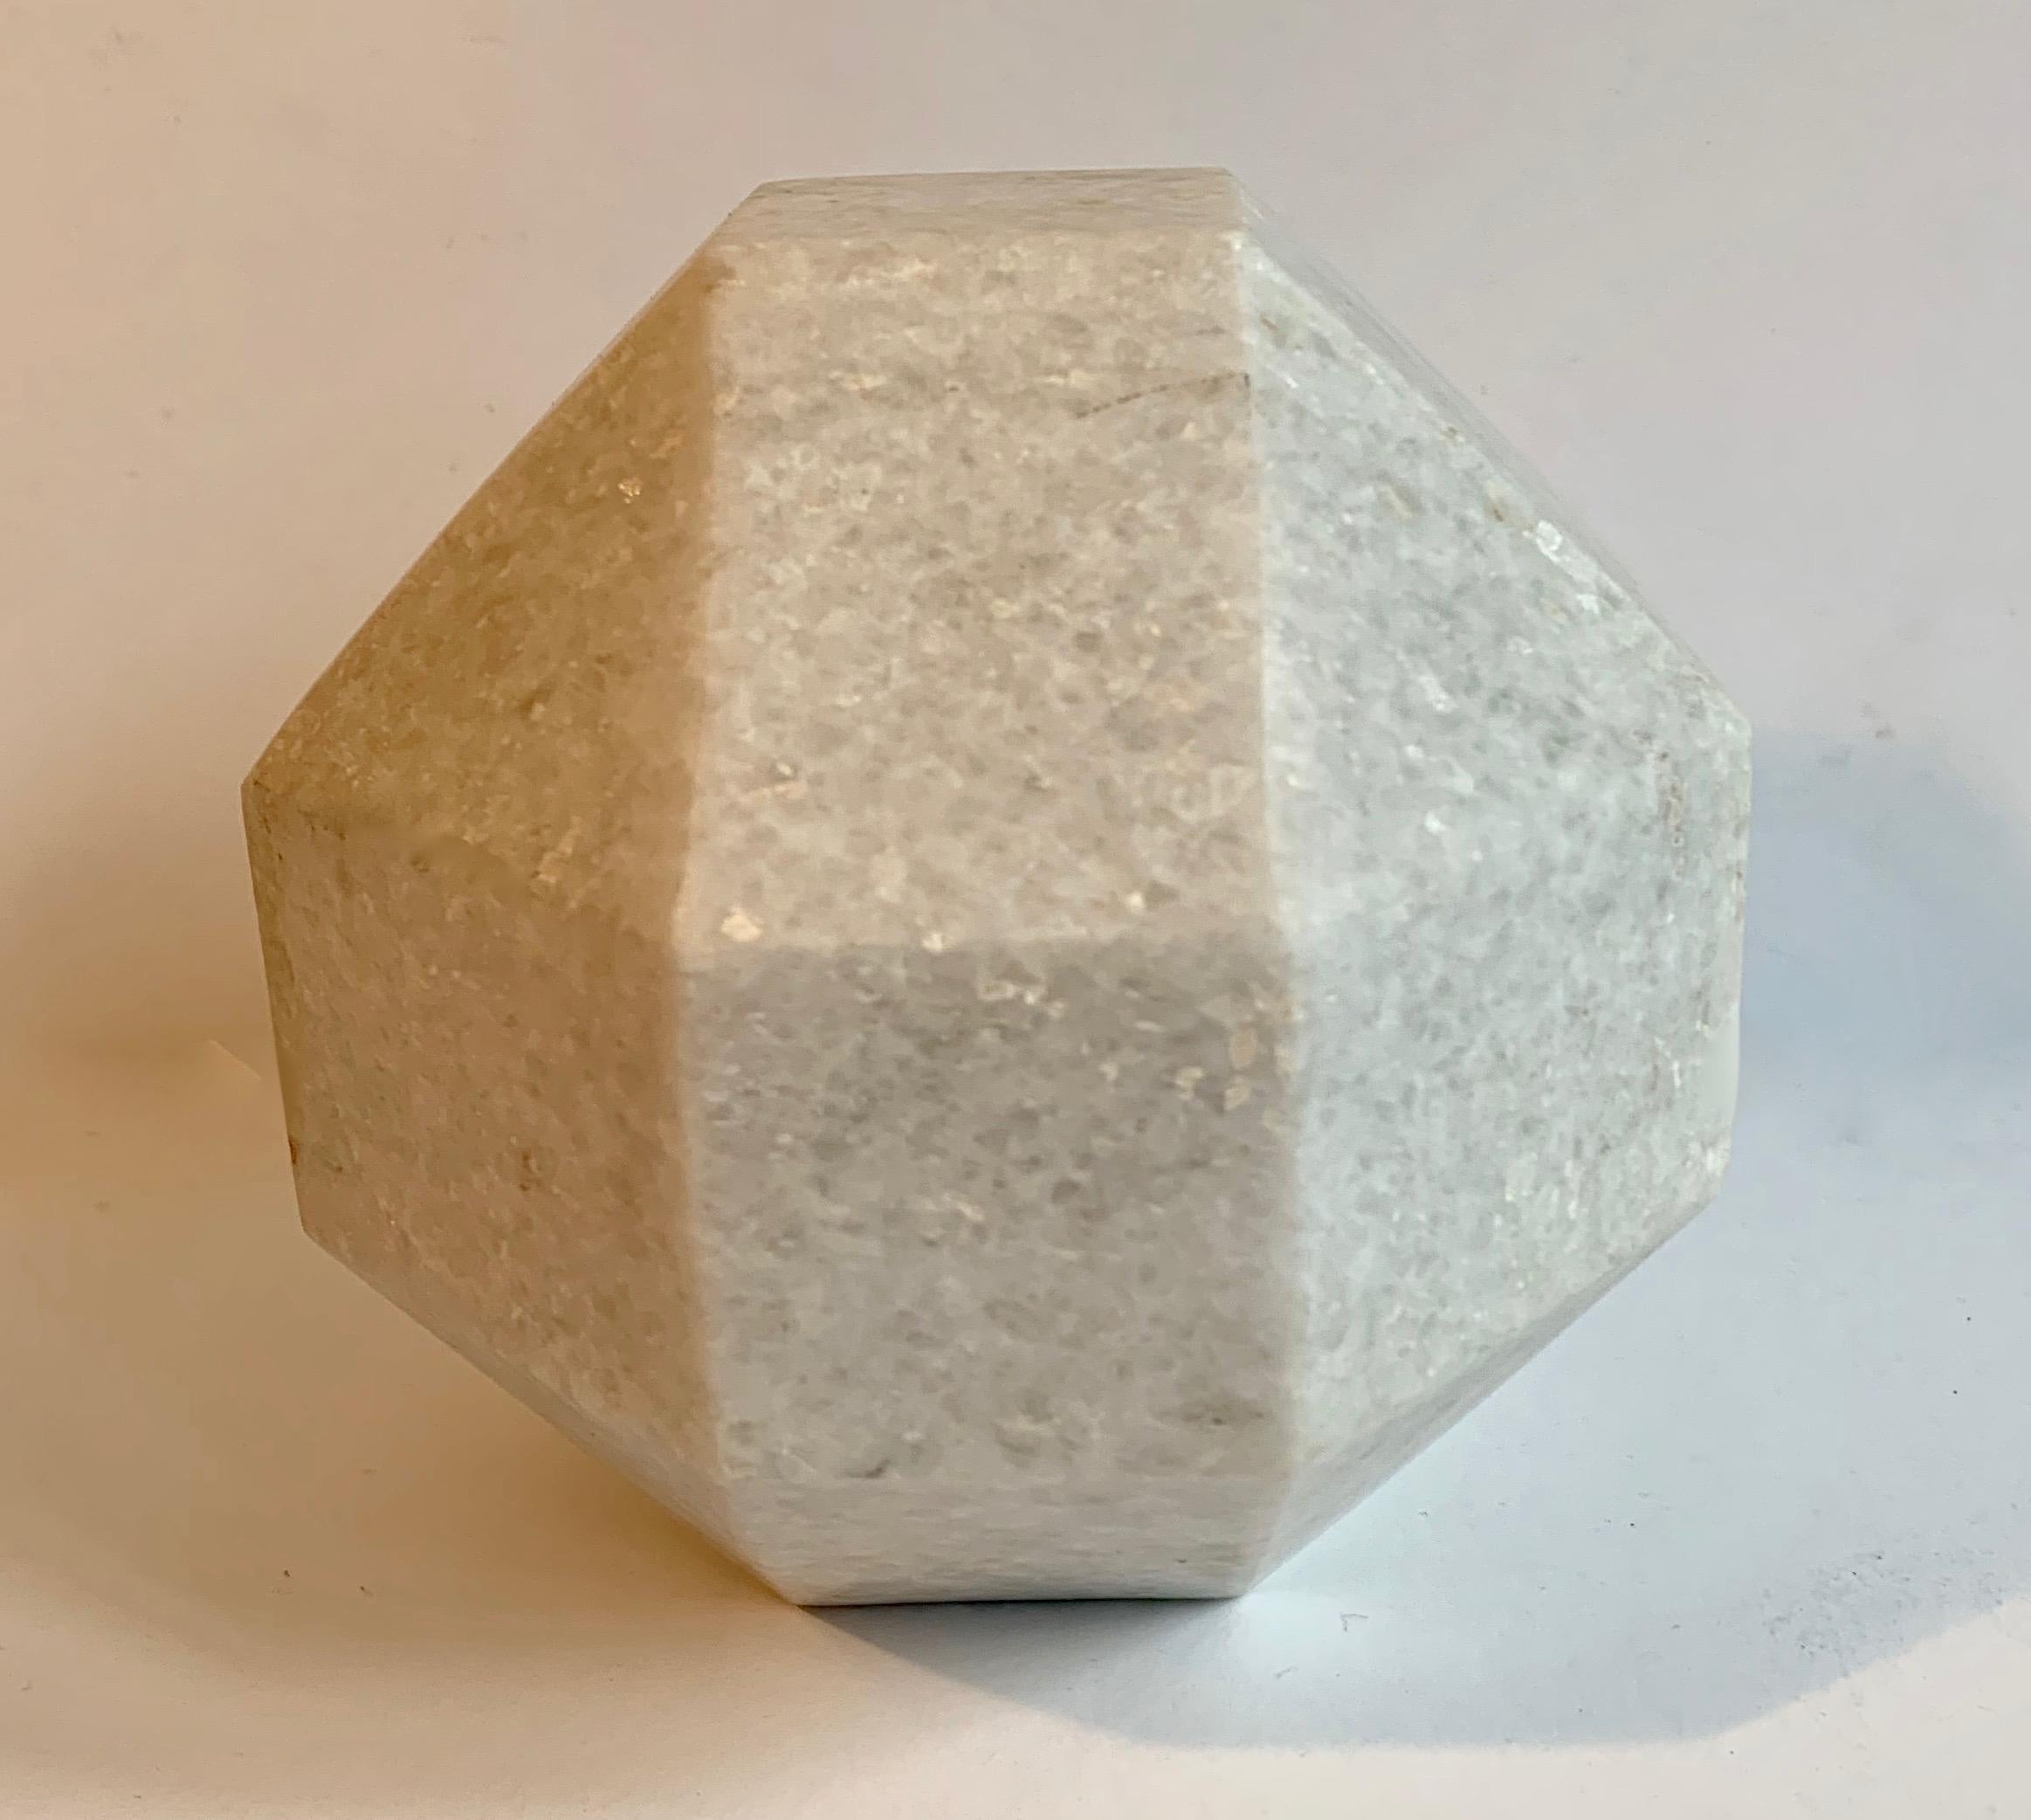 Solid granite paper weight - very clean, architectural and geometrical piece with 18 sides... a good weight for holding down important papers or simply decorating your space.